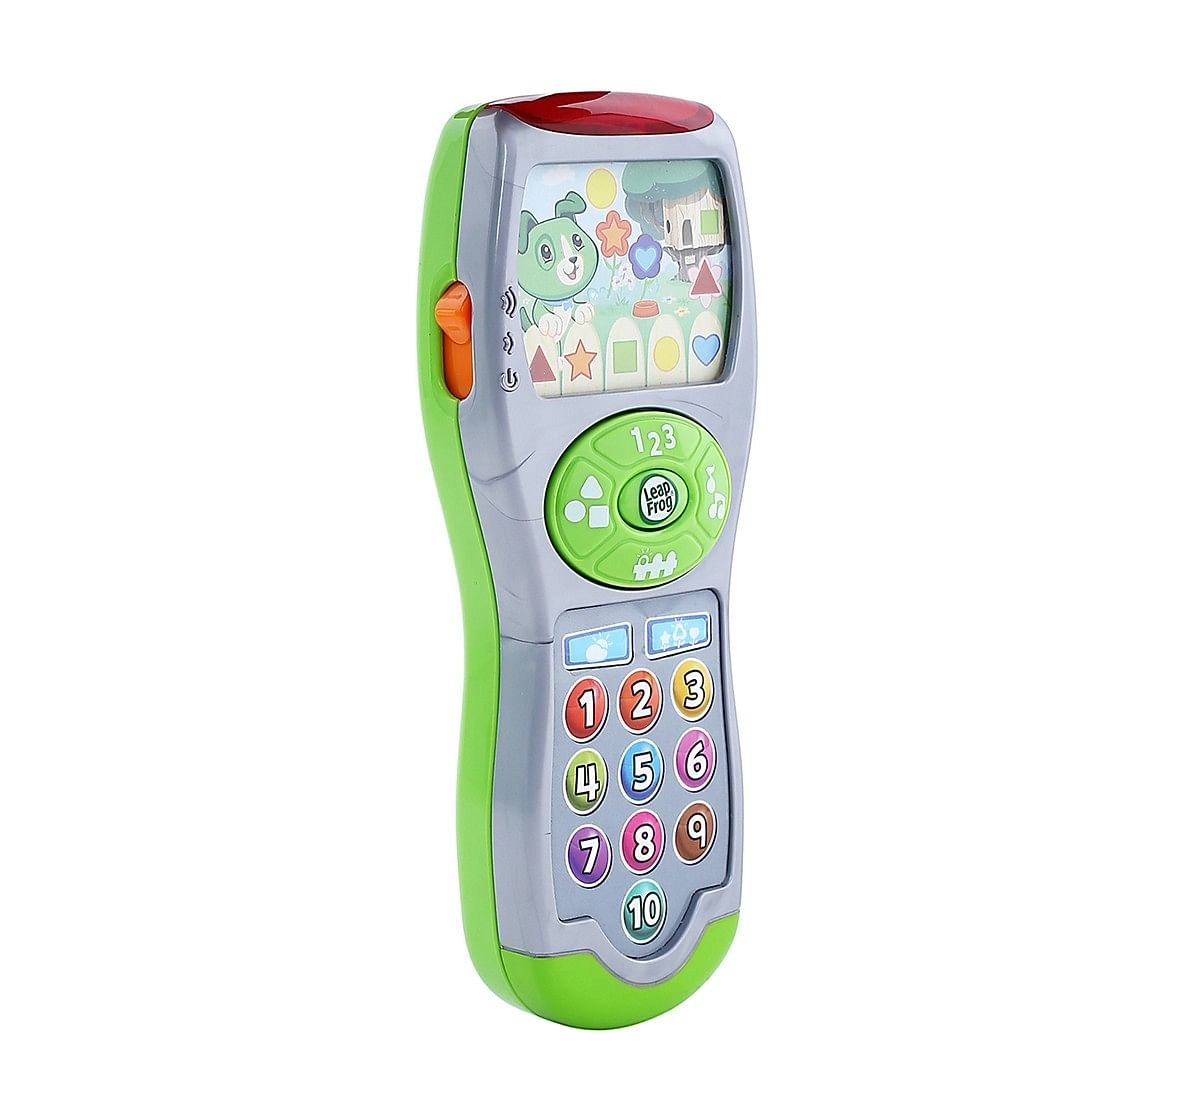  Leapfrog Light Up Remote, Green Learning Toys for Kids age 6M+ 